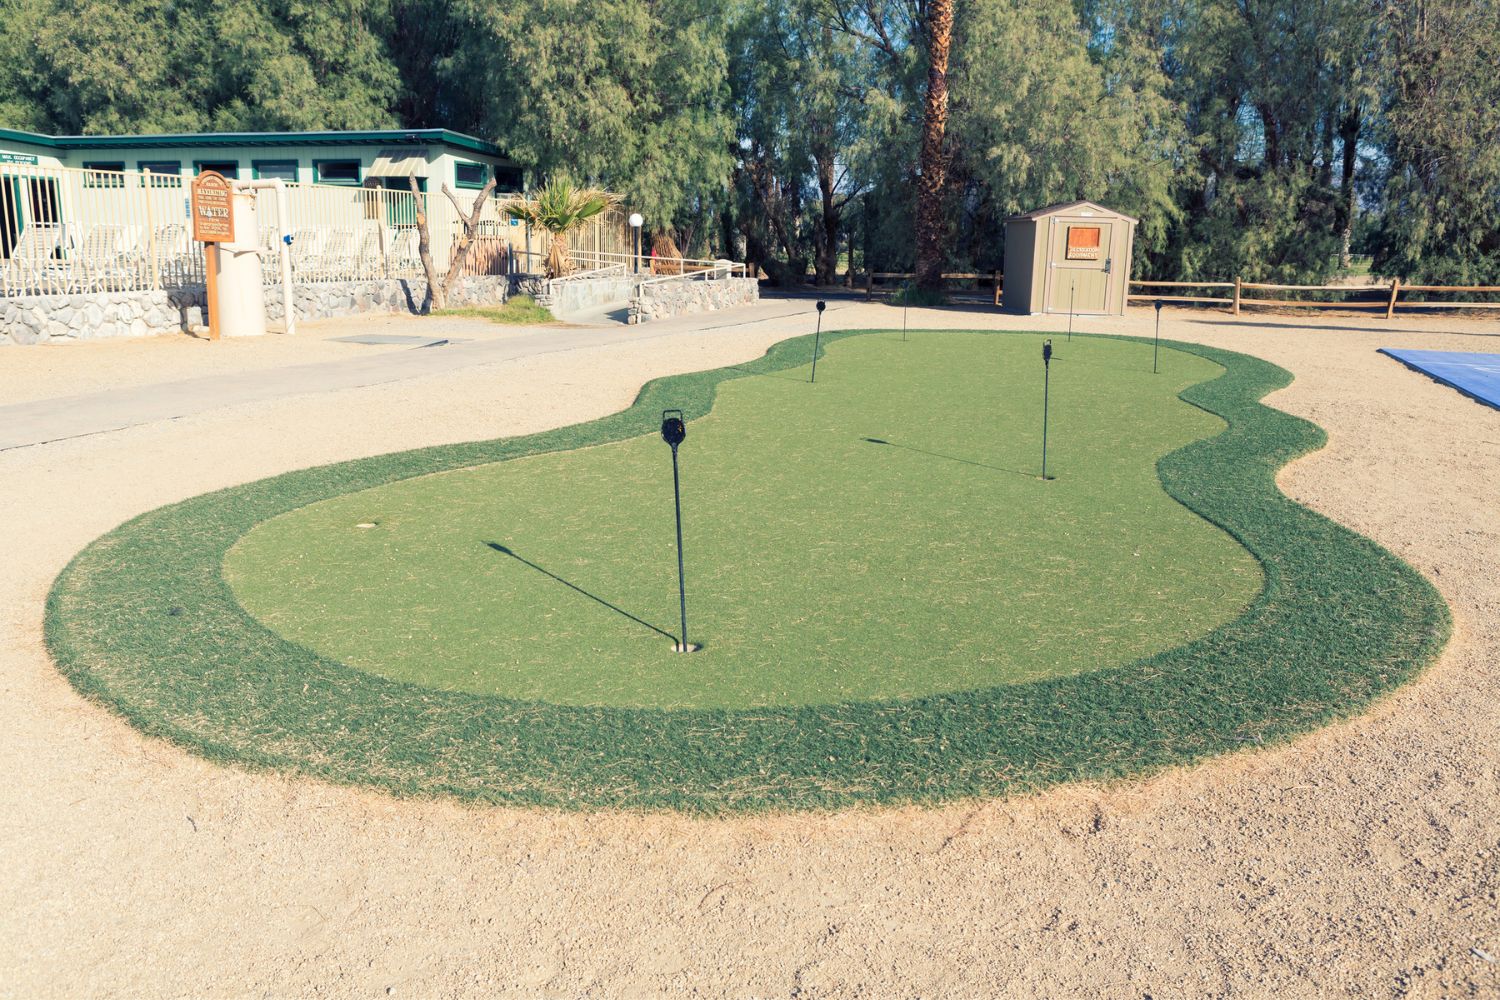 How Much Does a Backyard Putting Green Cost